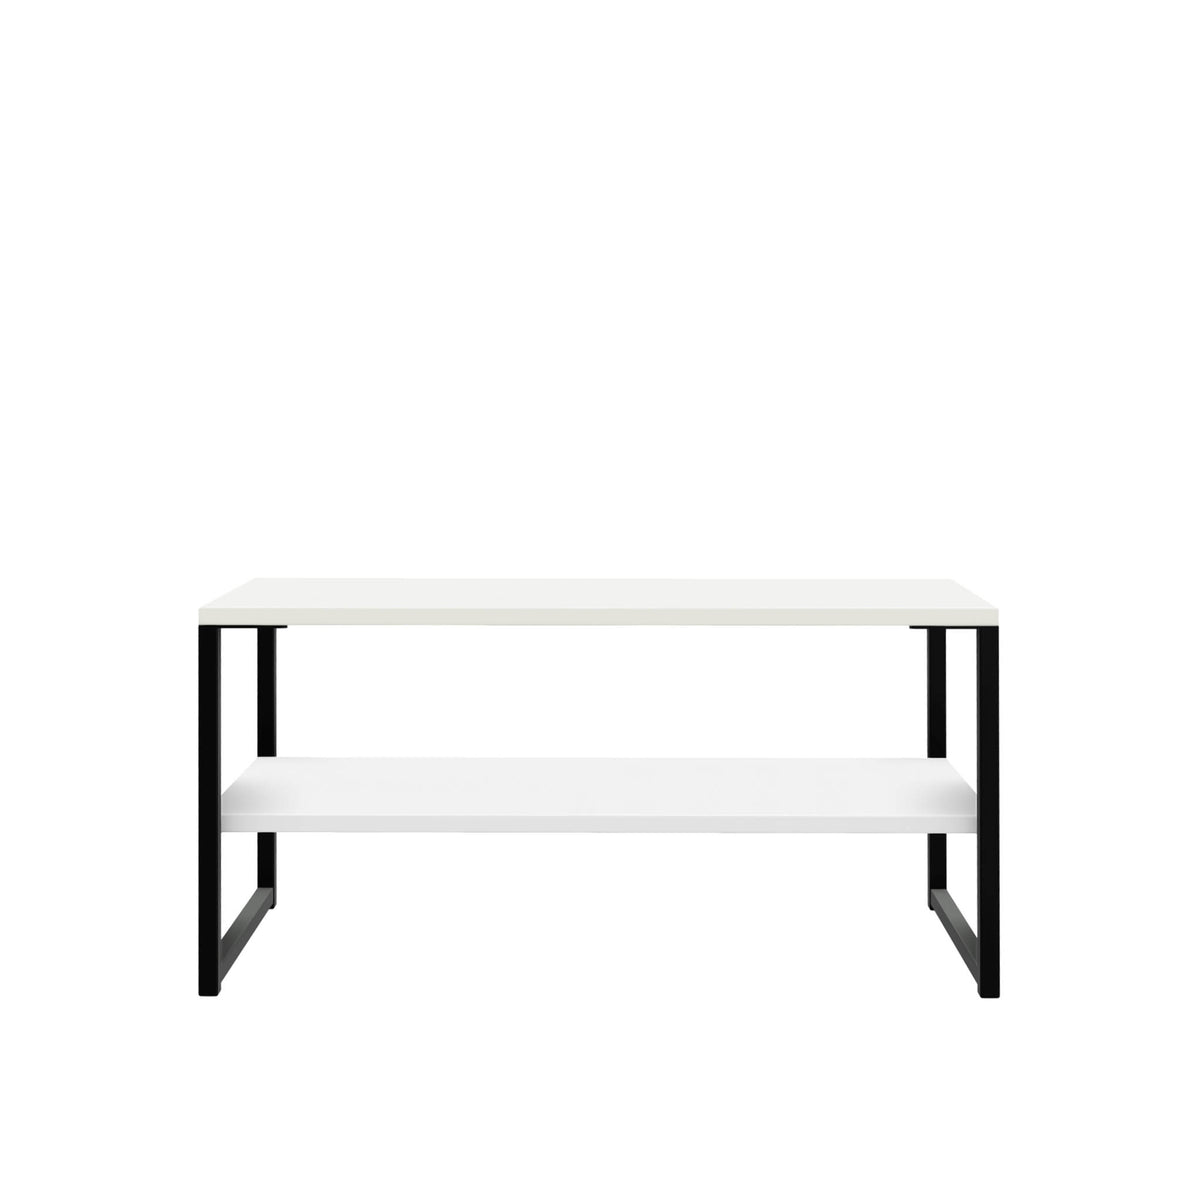 Hudson Grey Coffee Table with Shelf and black legs from Roseland